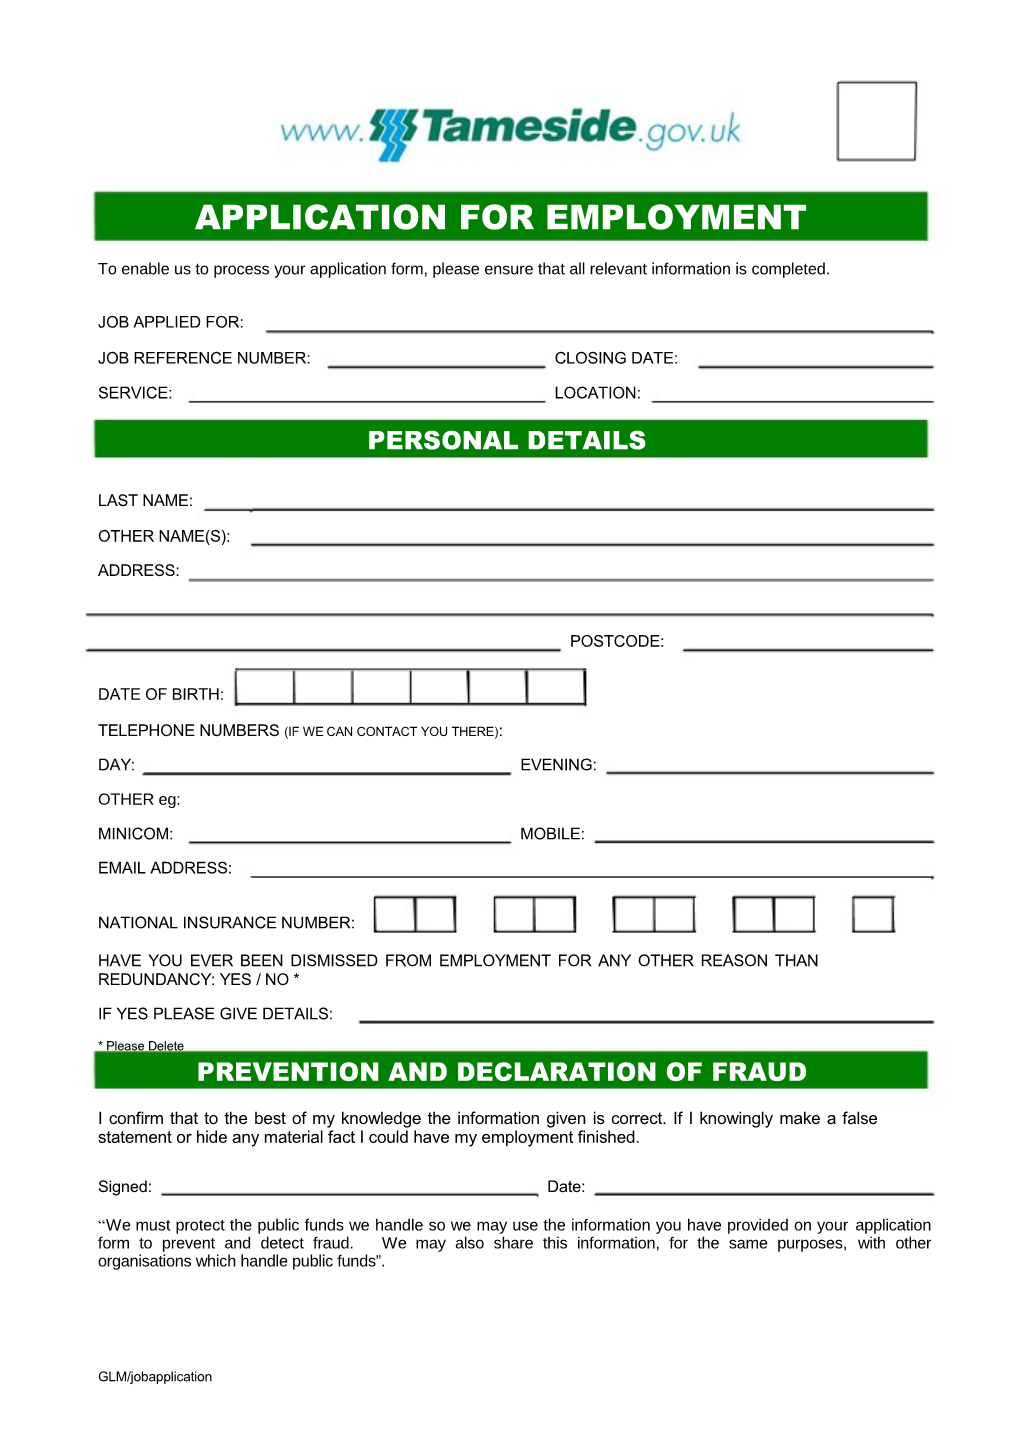 Application for Employment s143